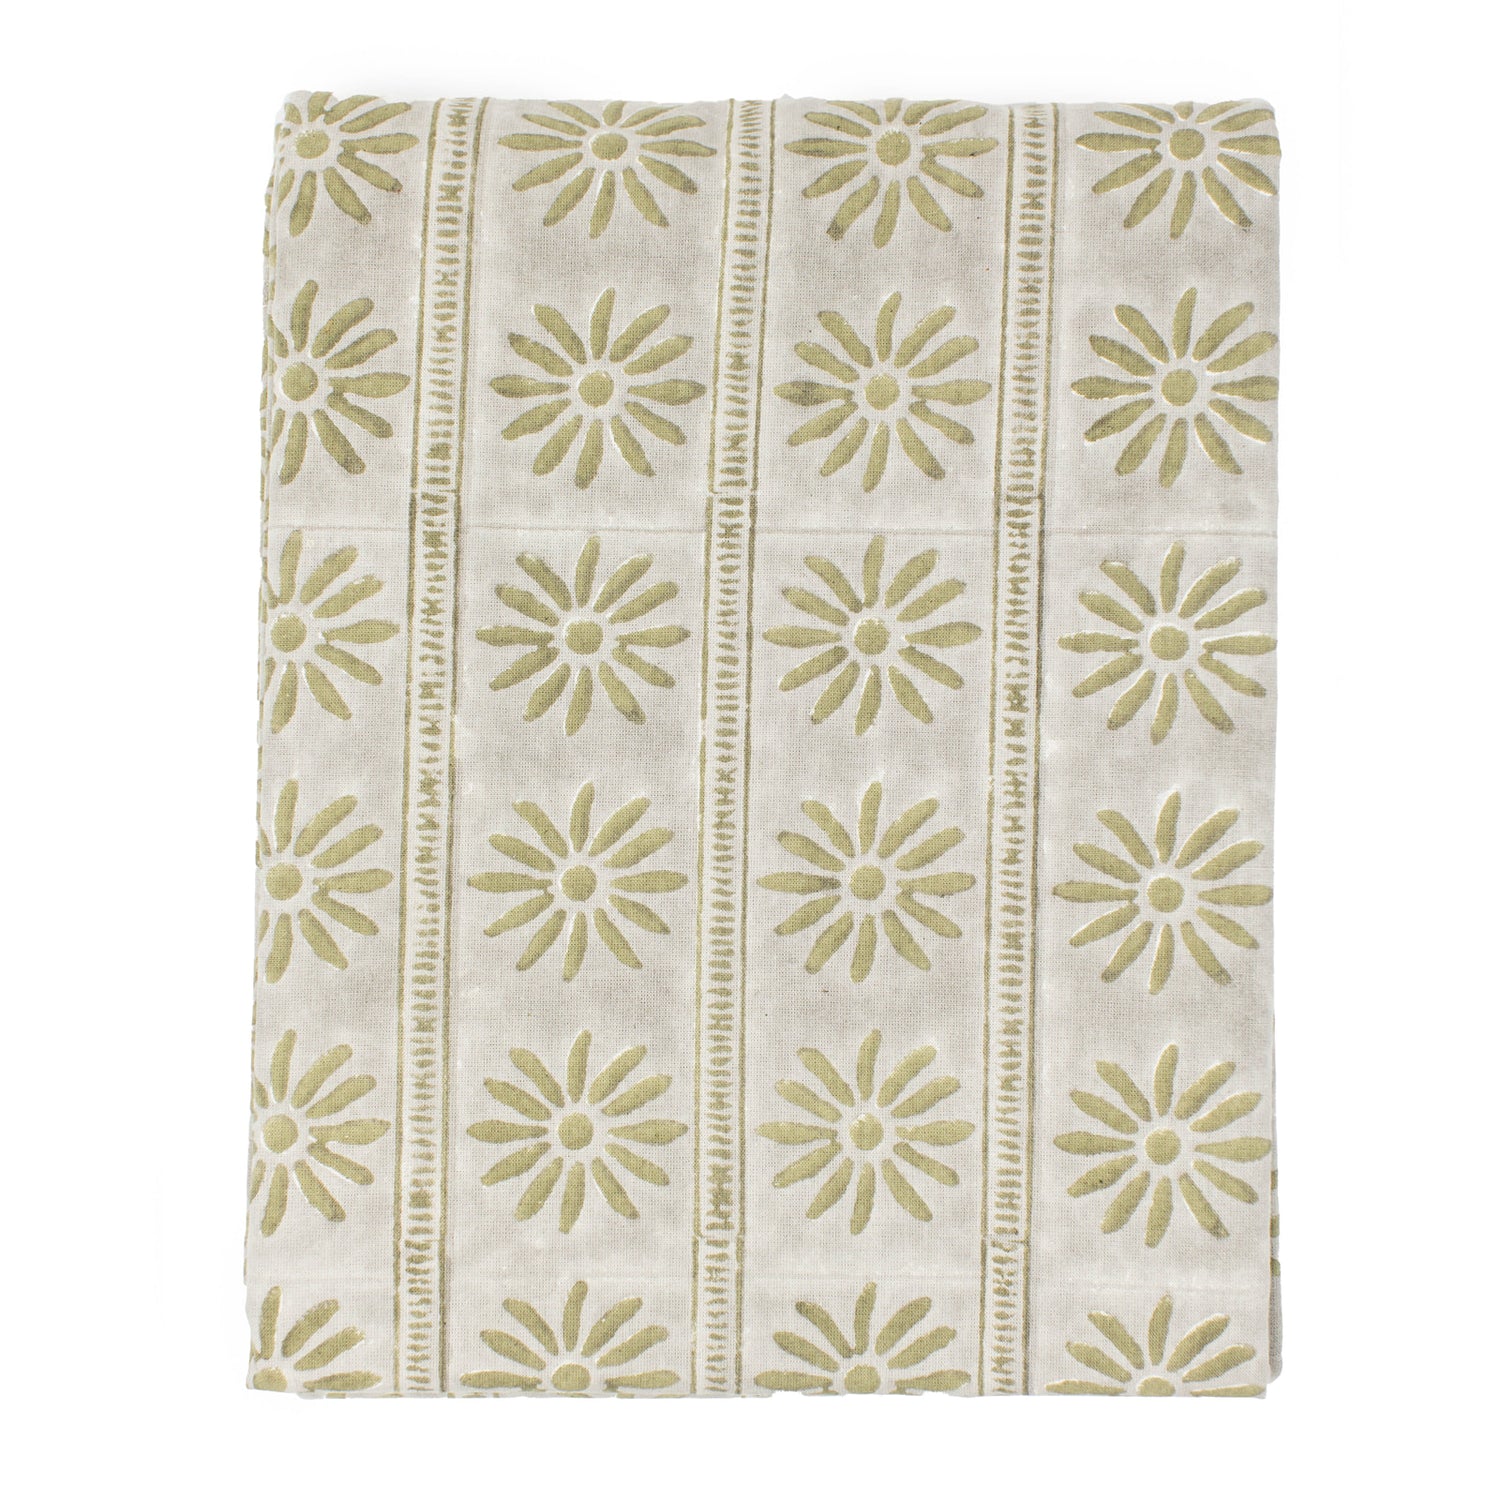 THE GREEN FLORAL AND LADDER TABLECLOTH